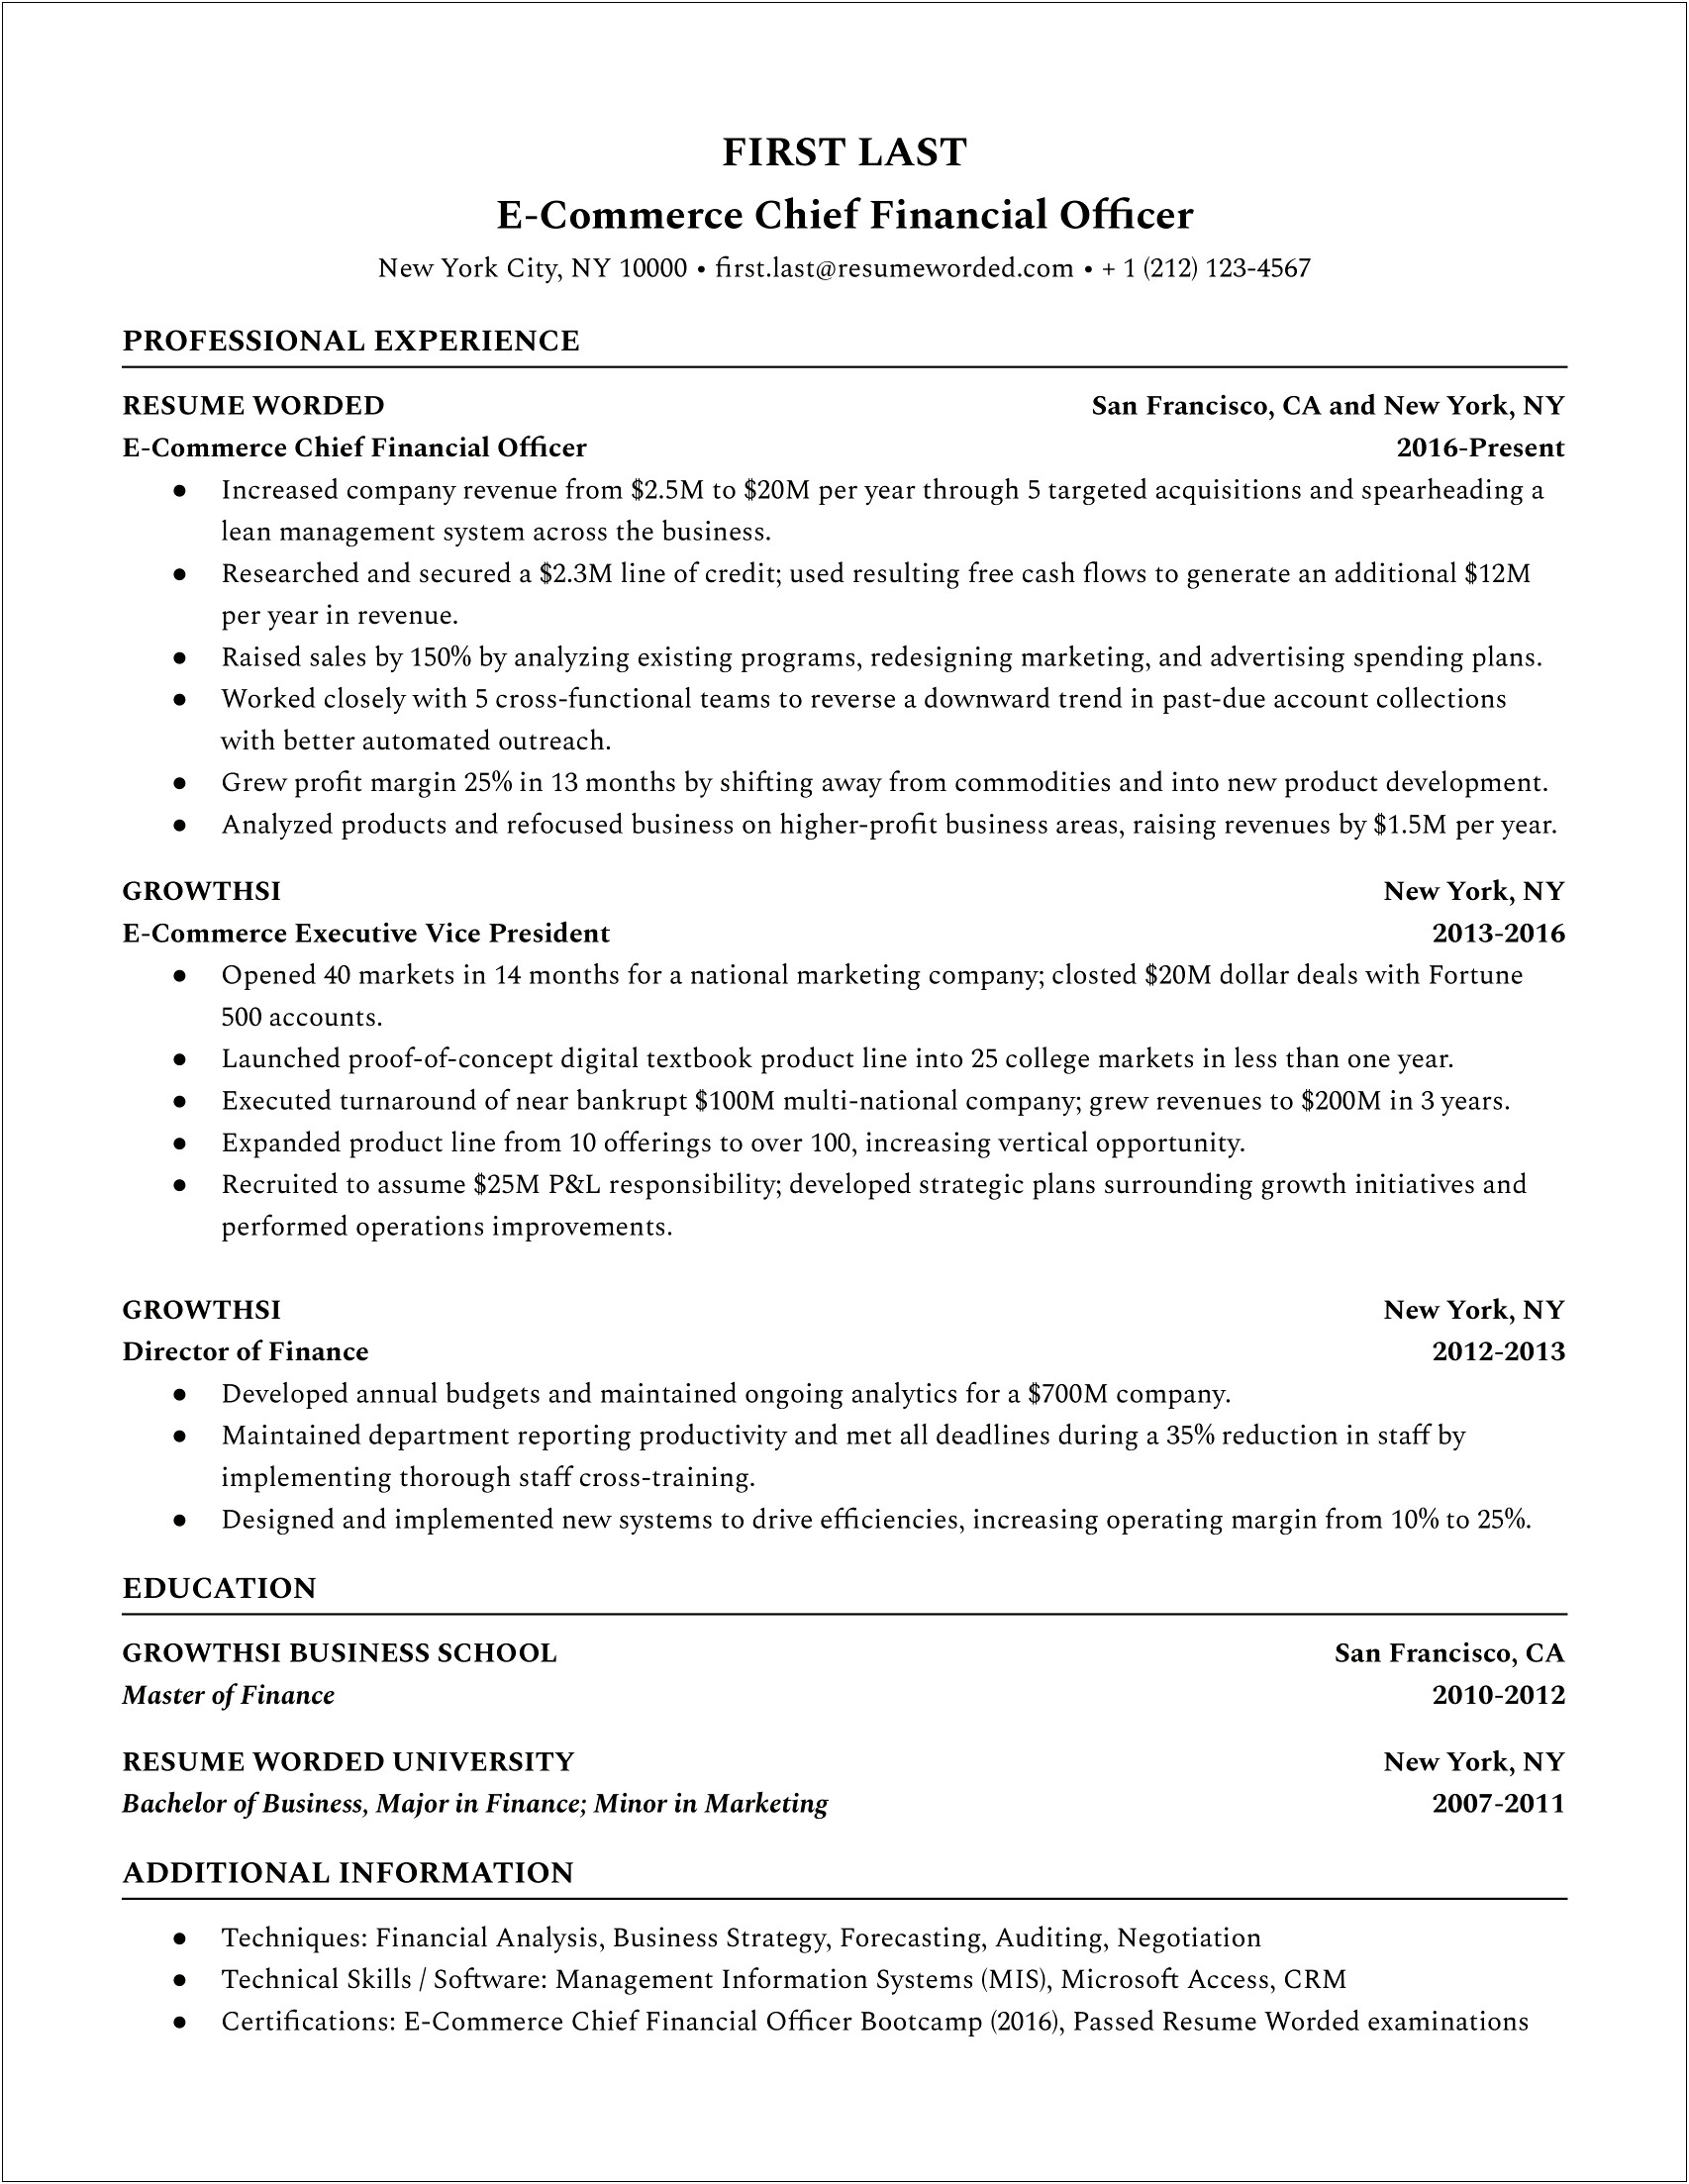 Skills To List On Resume For Finance